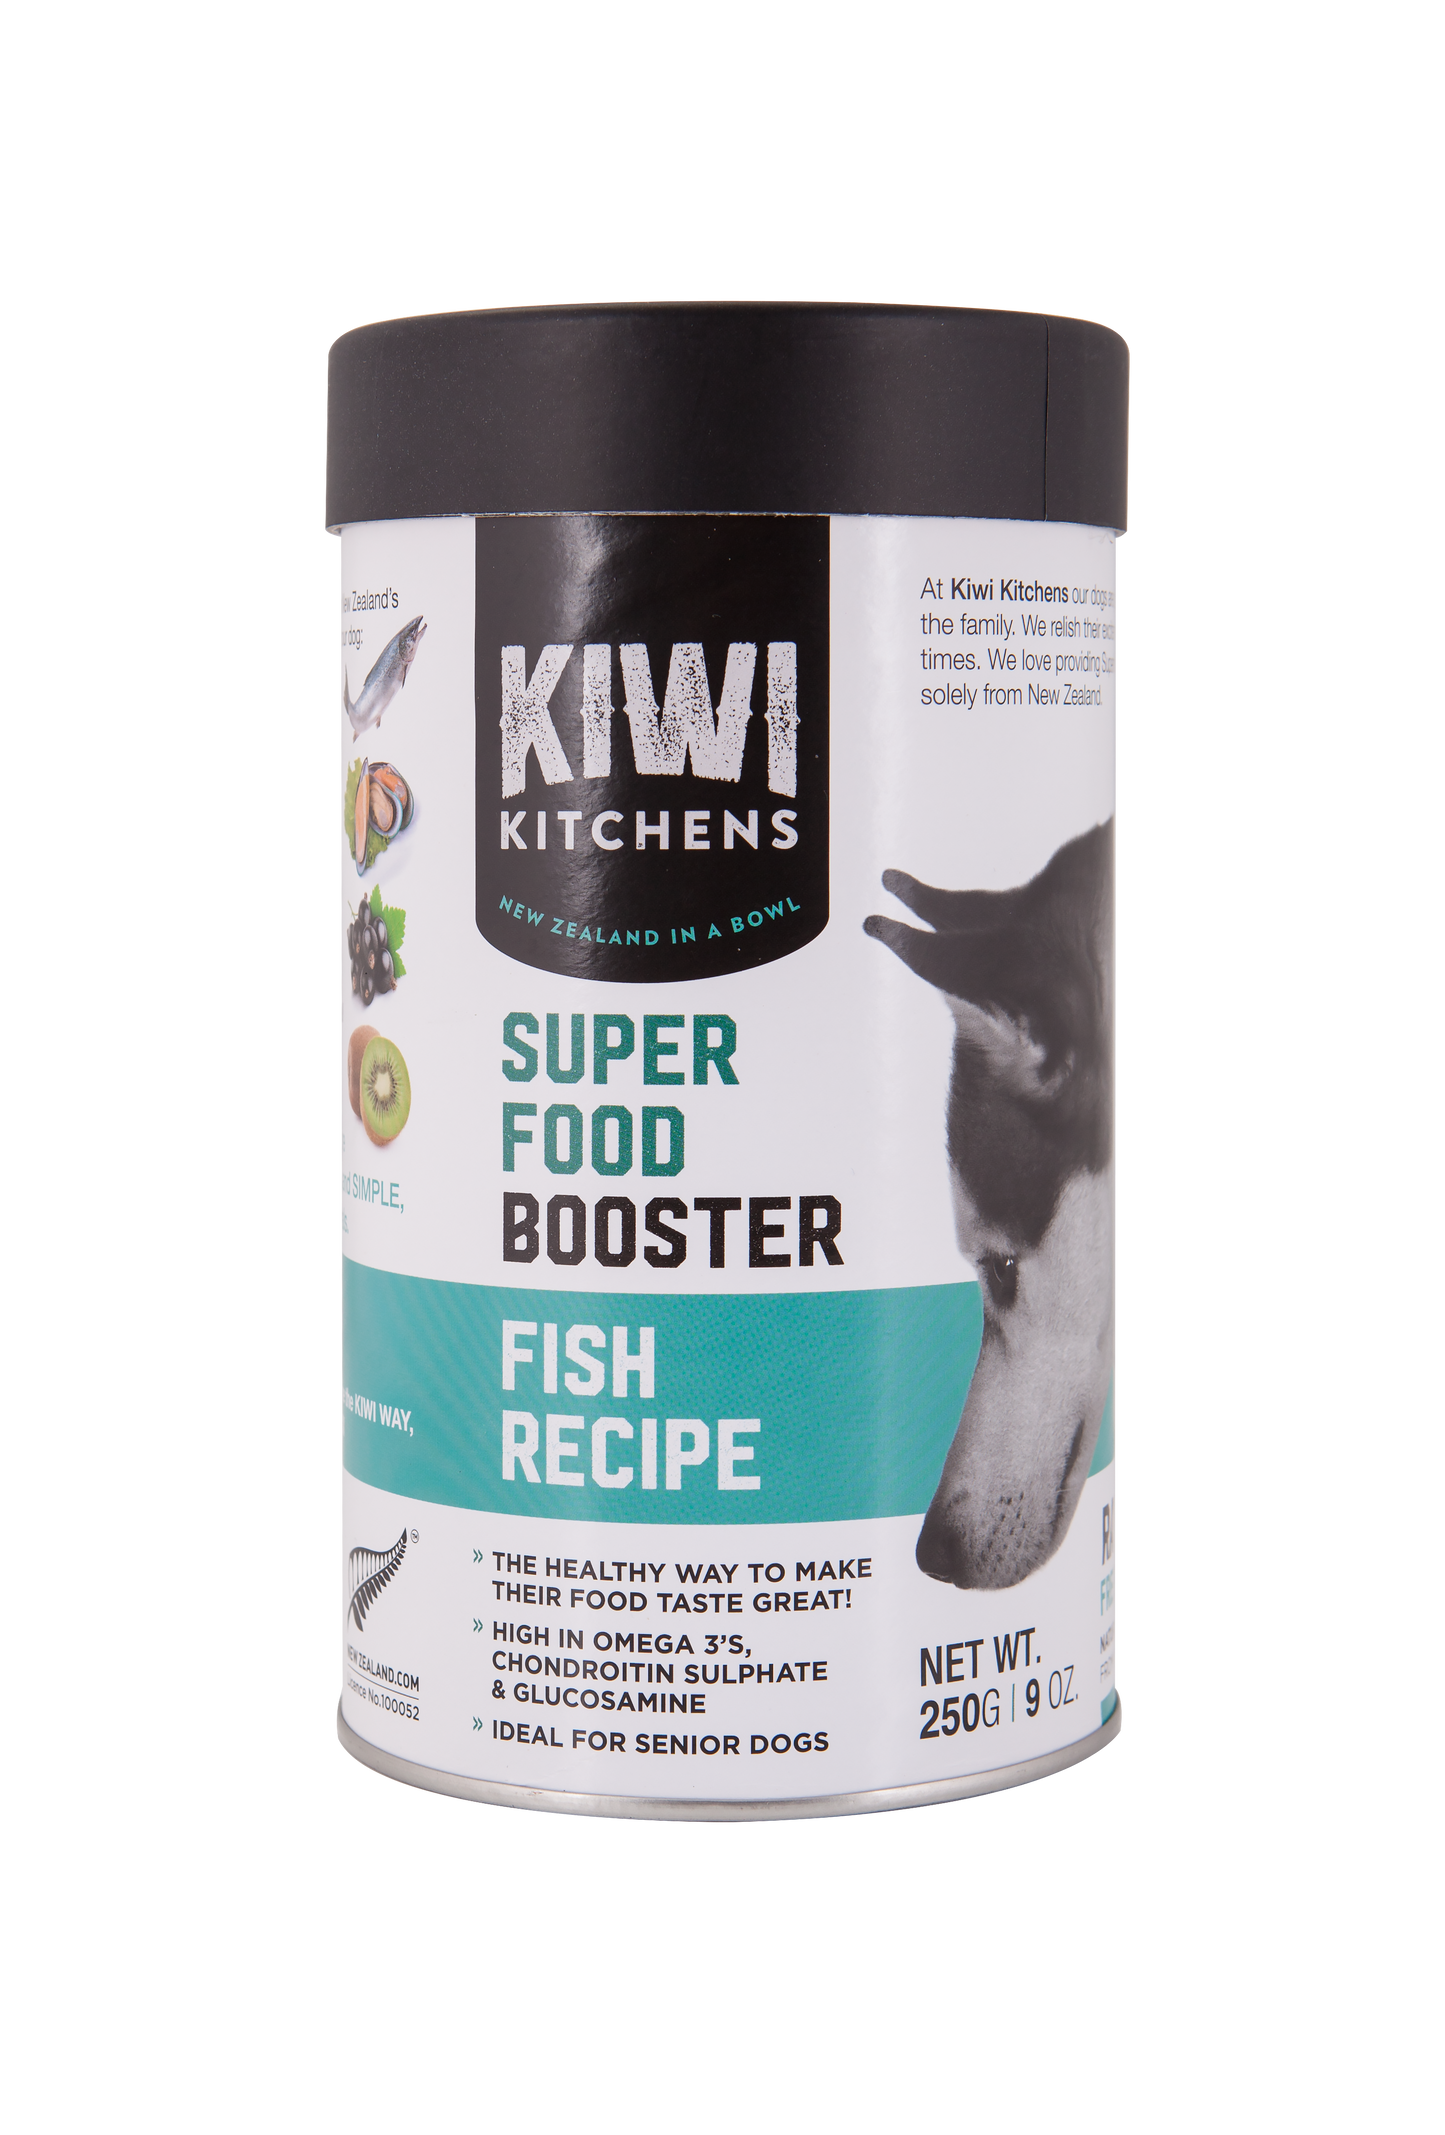 Kiwi Kitchens Superfood Booster Fish Recipe 9-oz, Dog Meal Topper